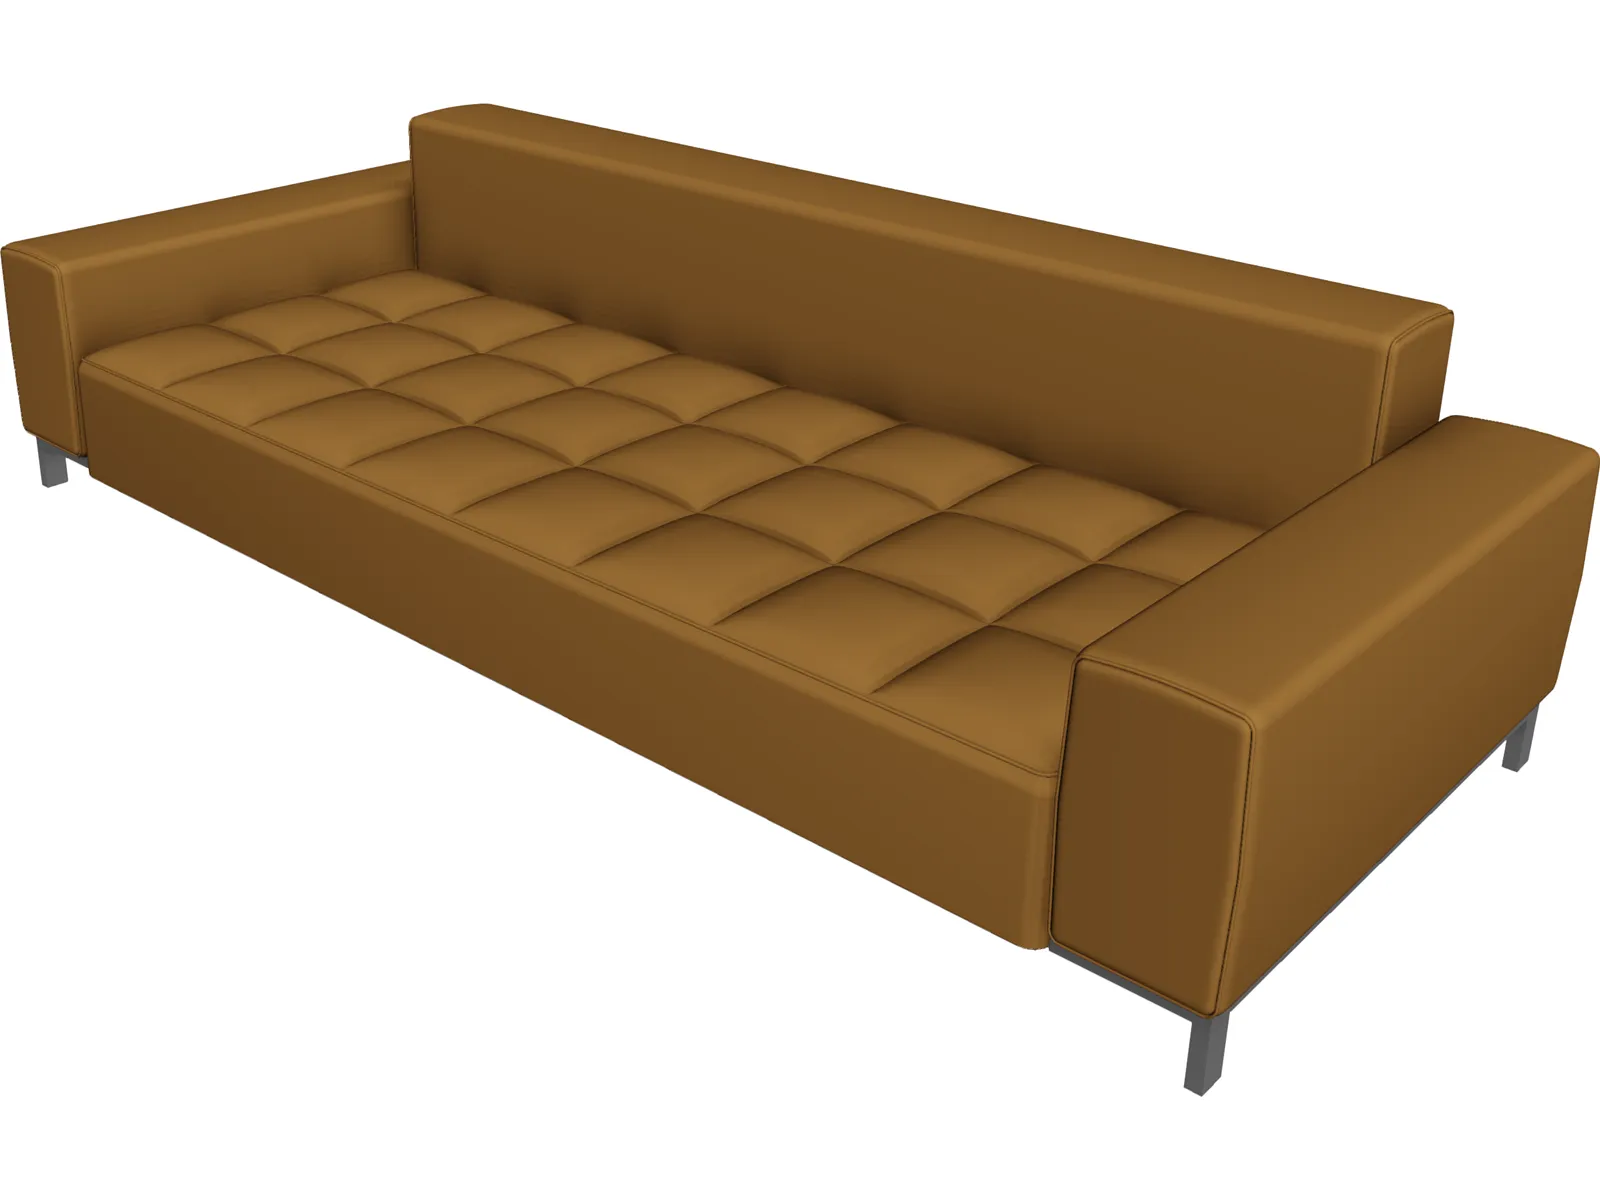 Couch Leather Pillow 3D Model